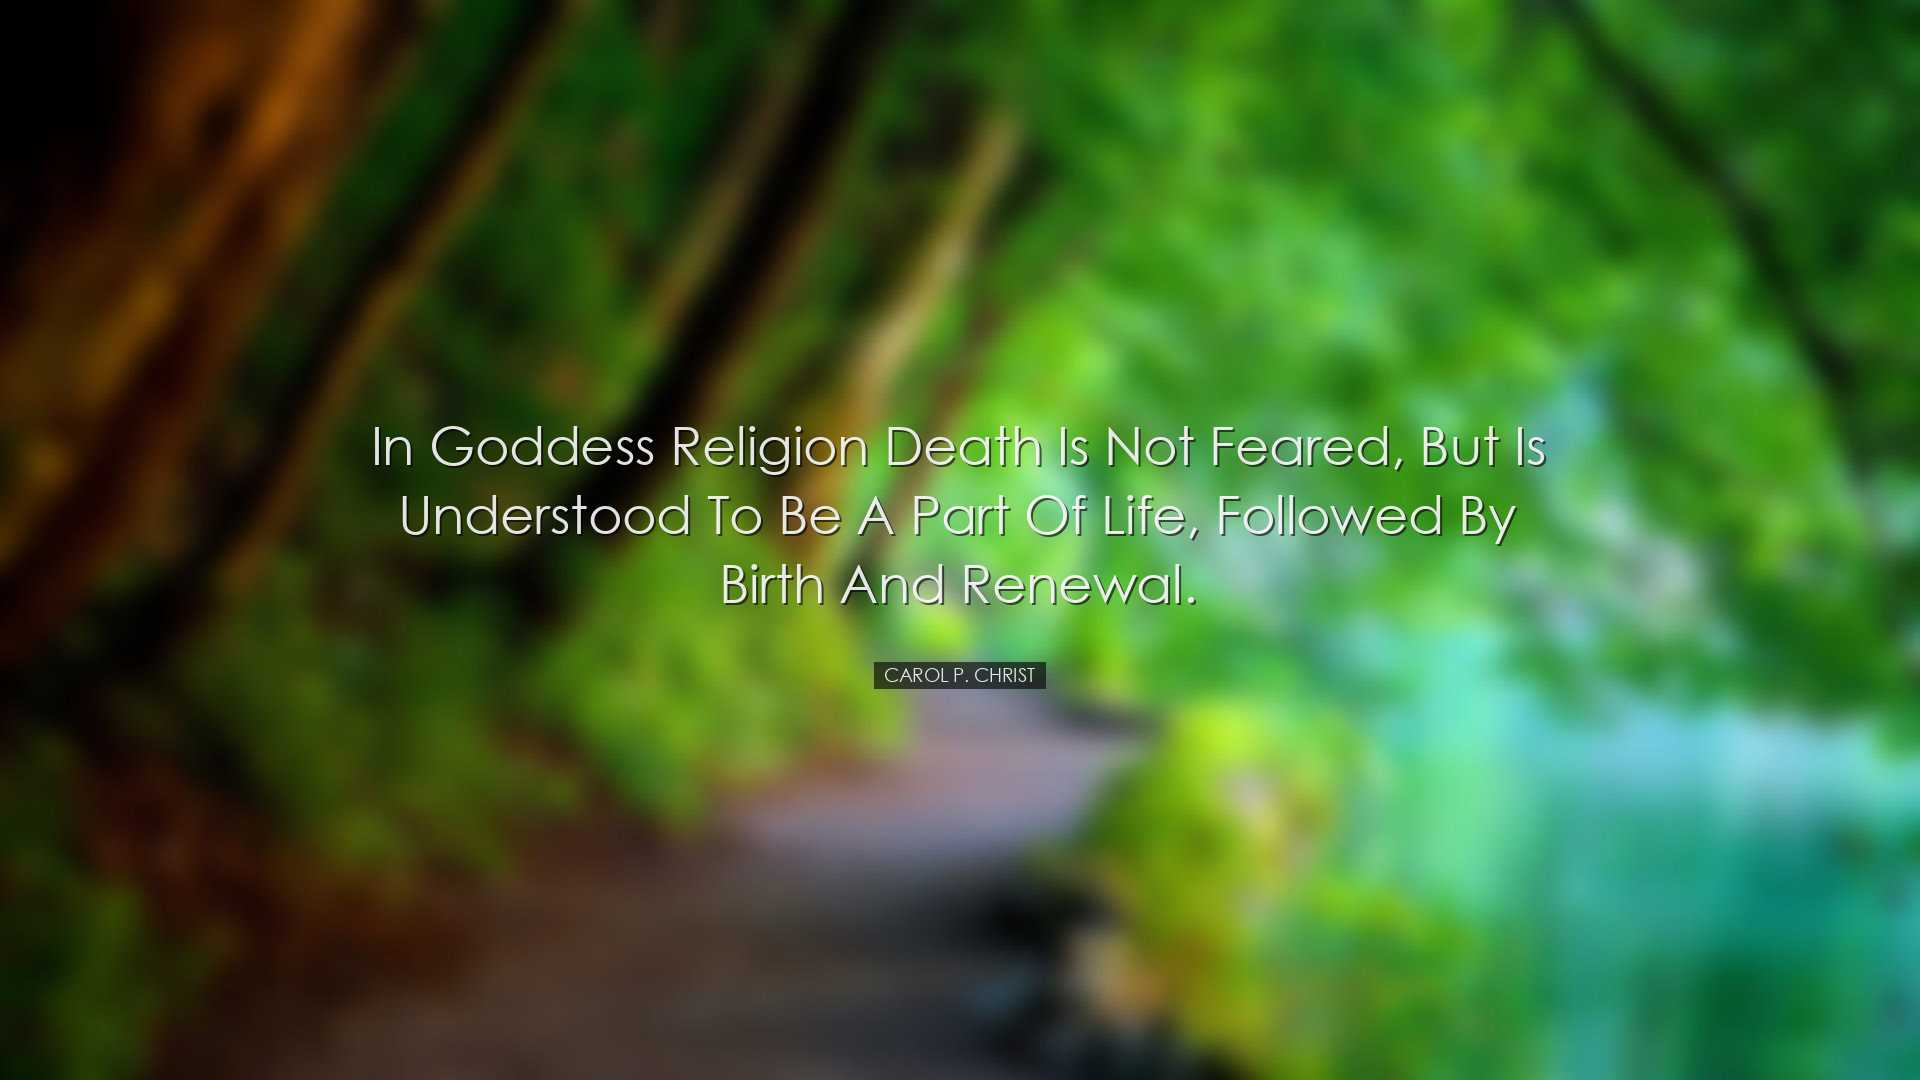 In Goddess religion death is not feared, but is understood to be a